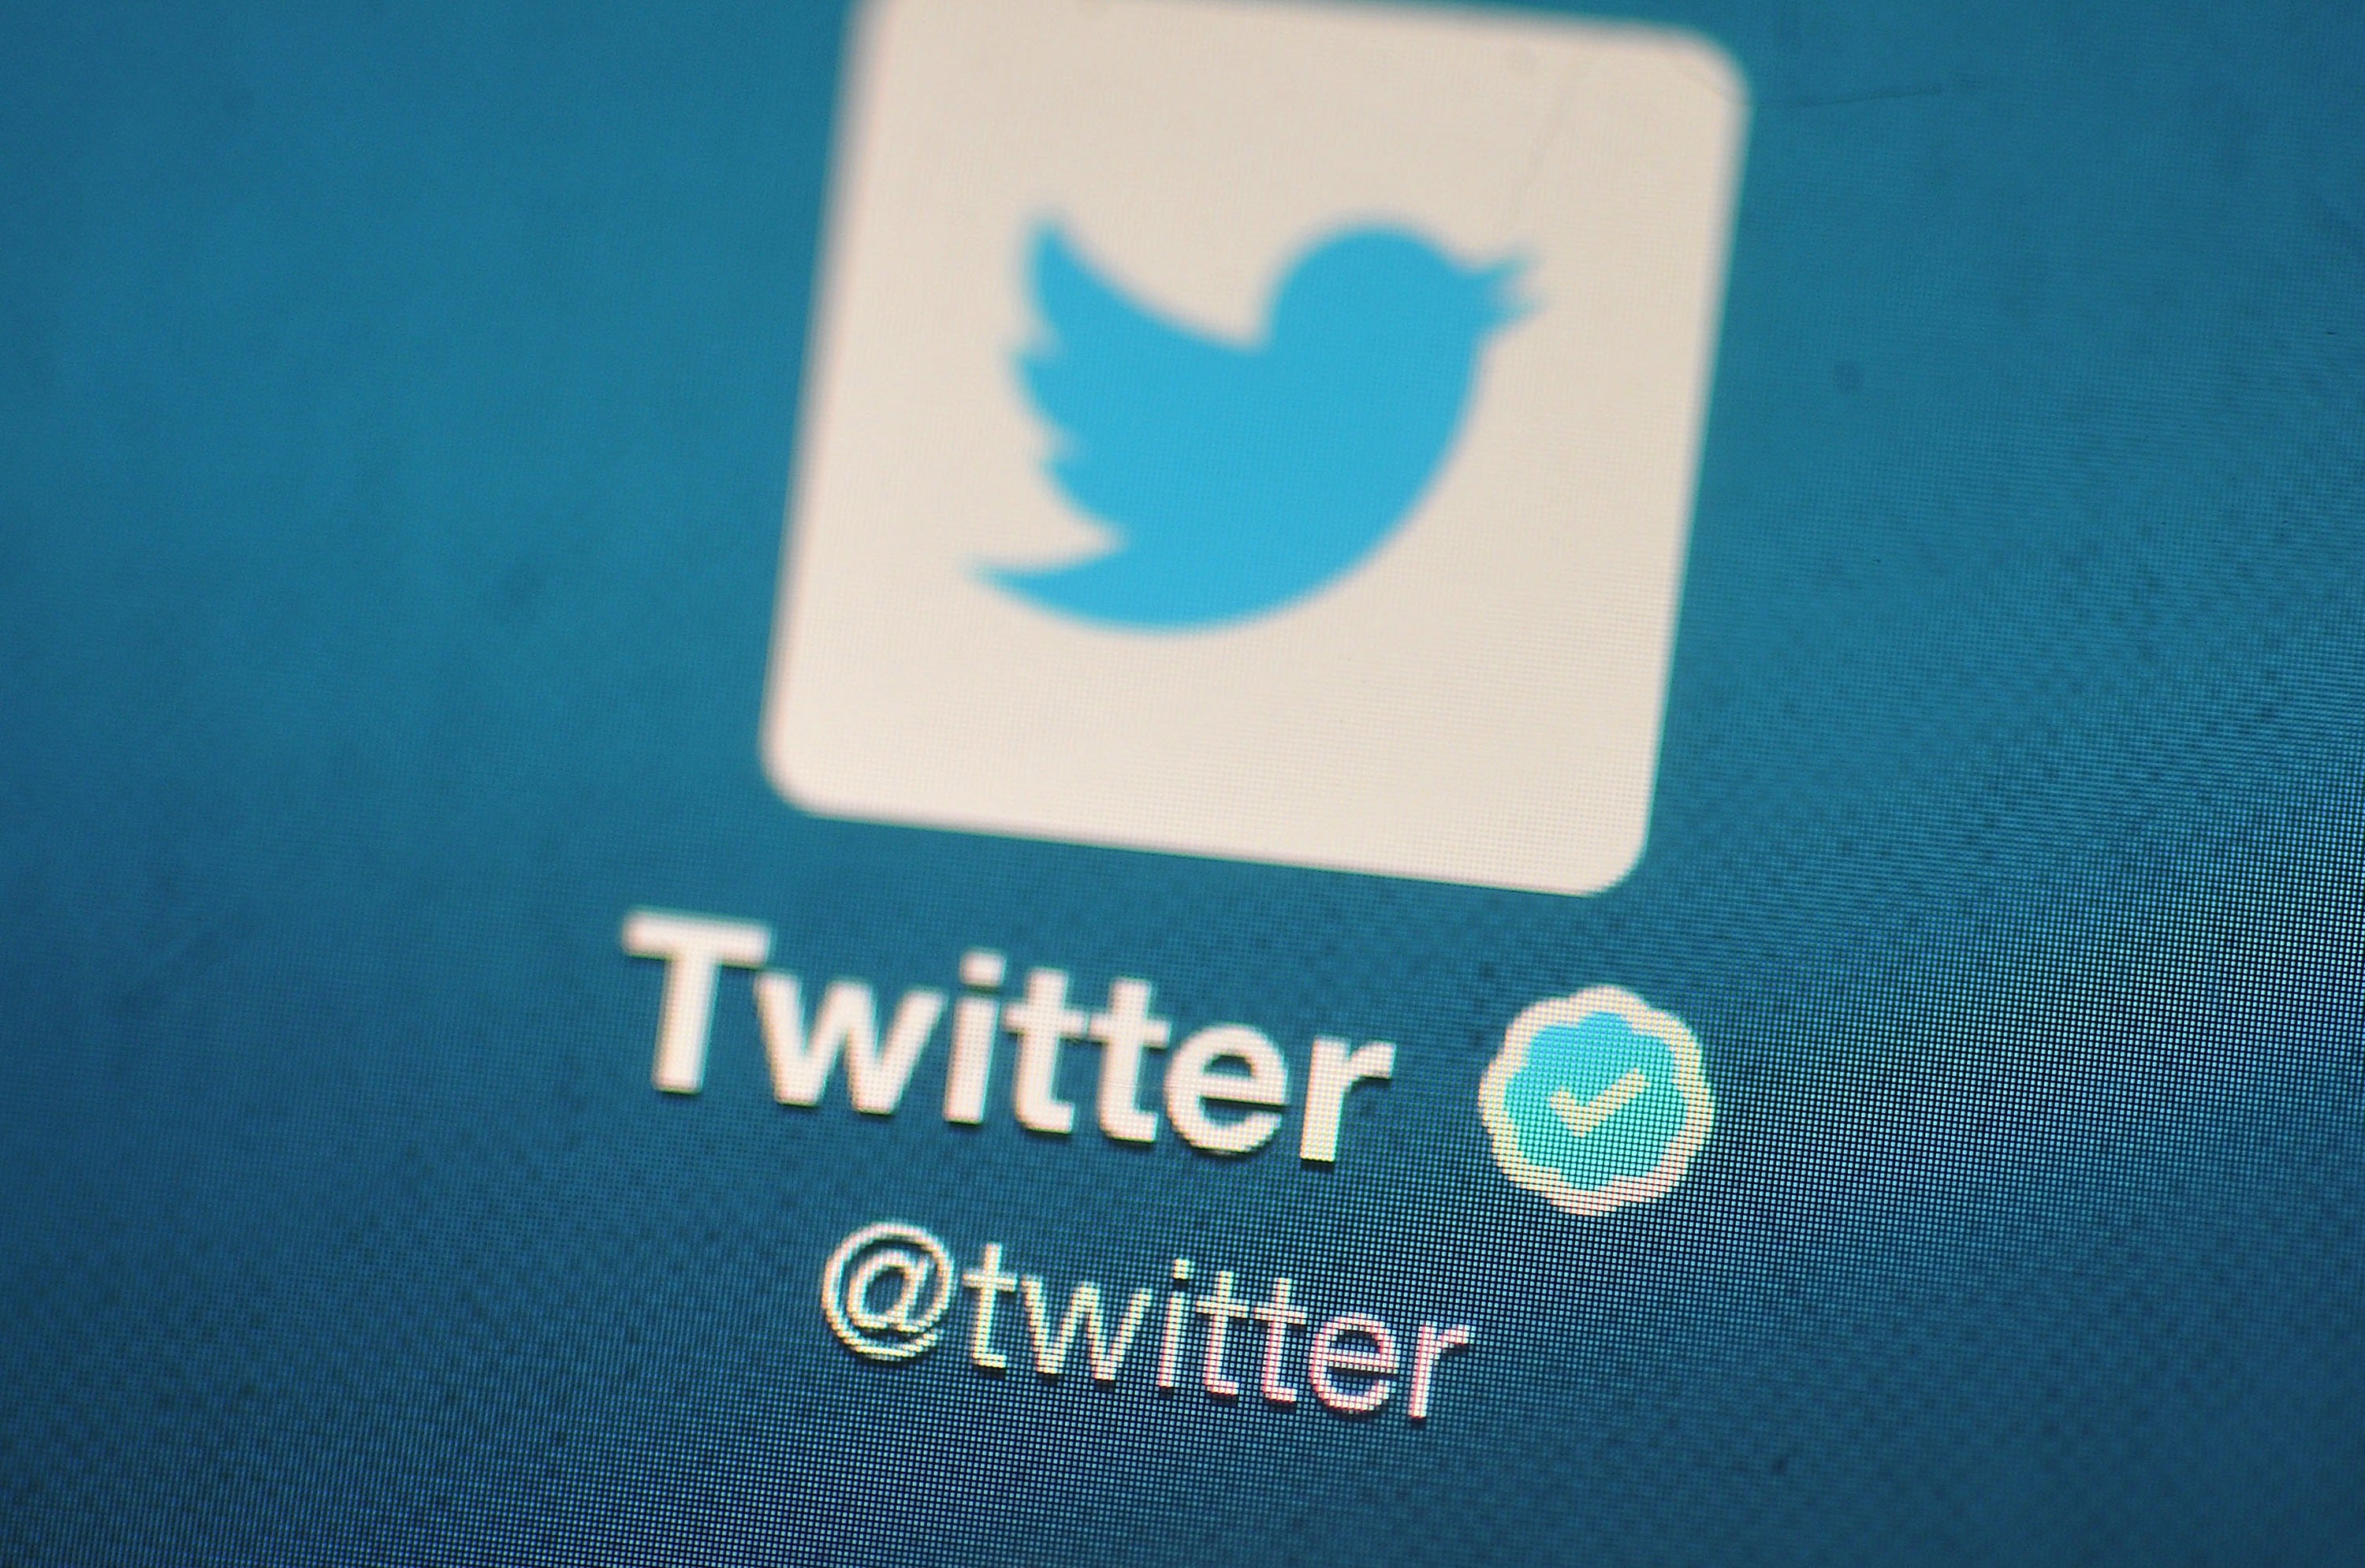 Twitter has made a number of minor changes to its character limit in the past